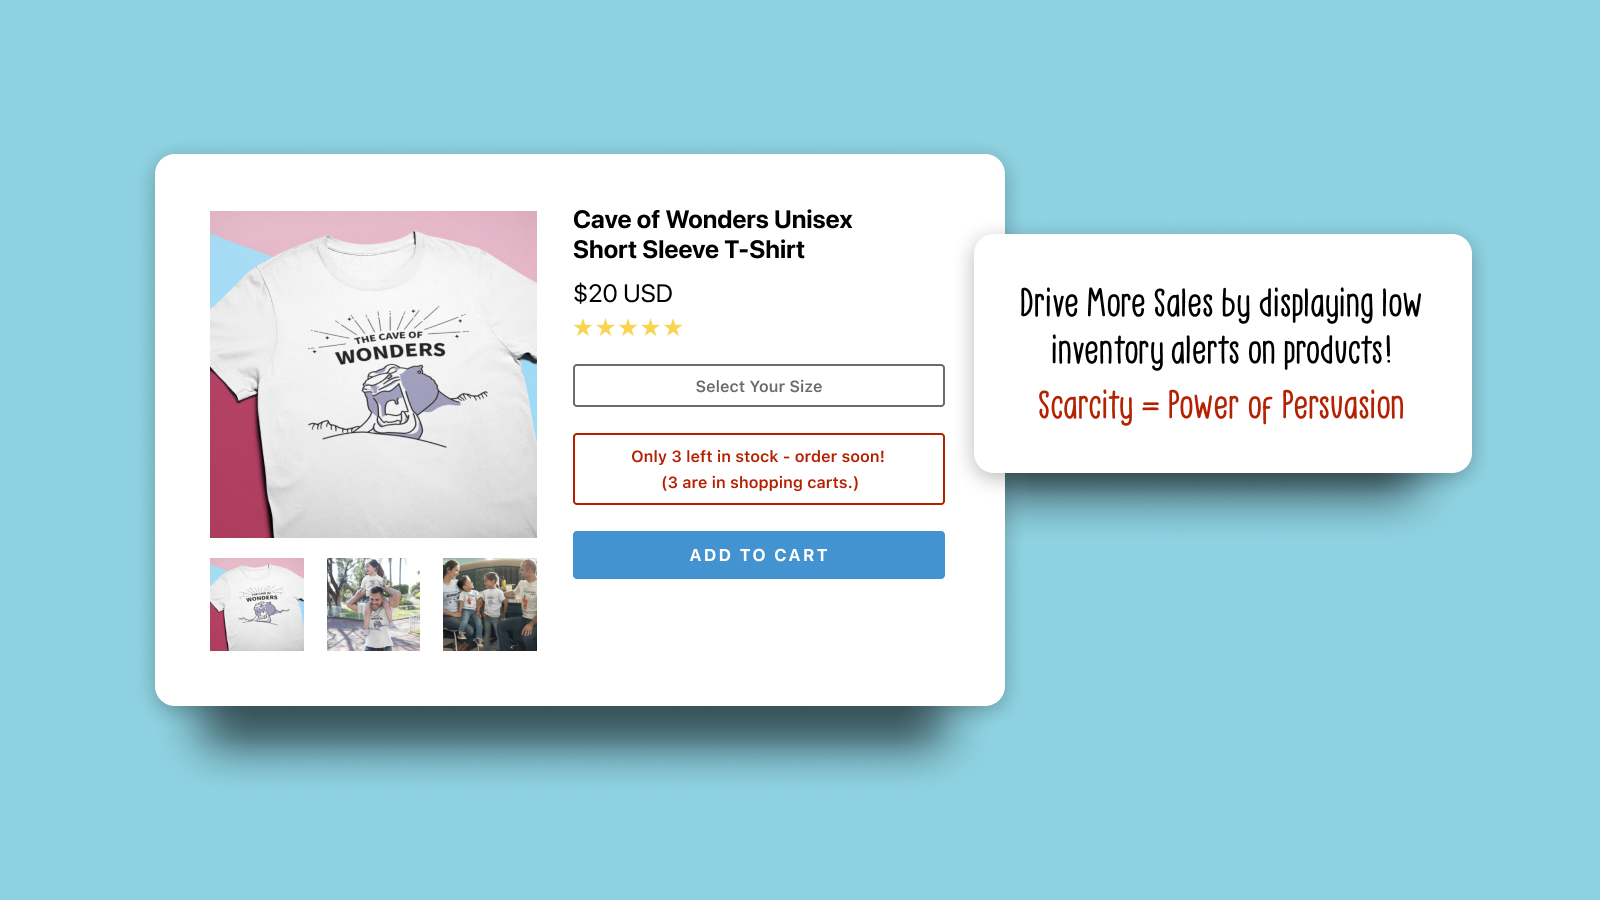 Drive More Sales by displaying low inventory alerts on products!